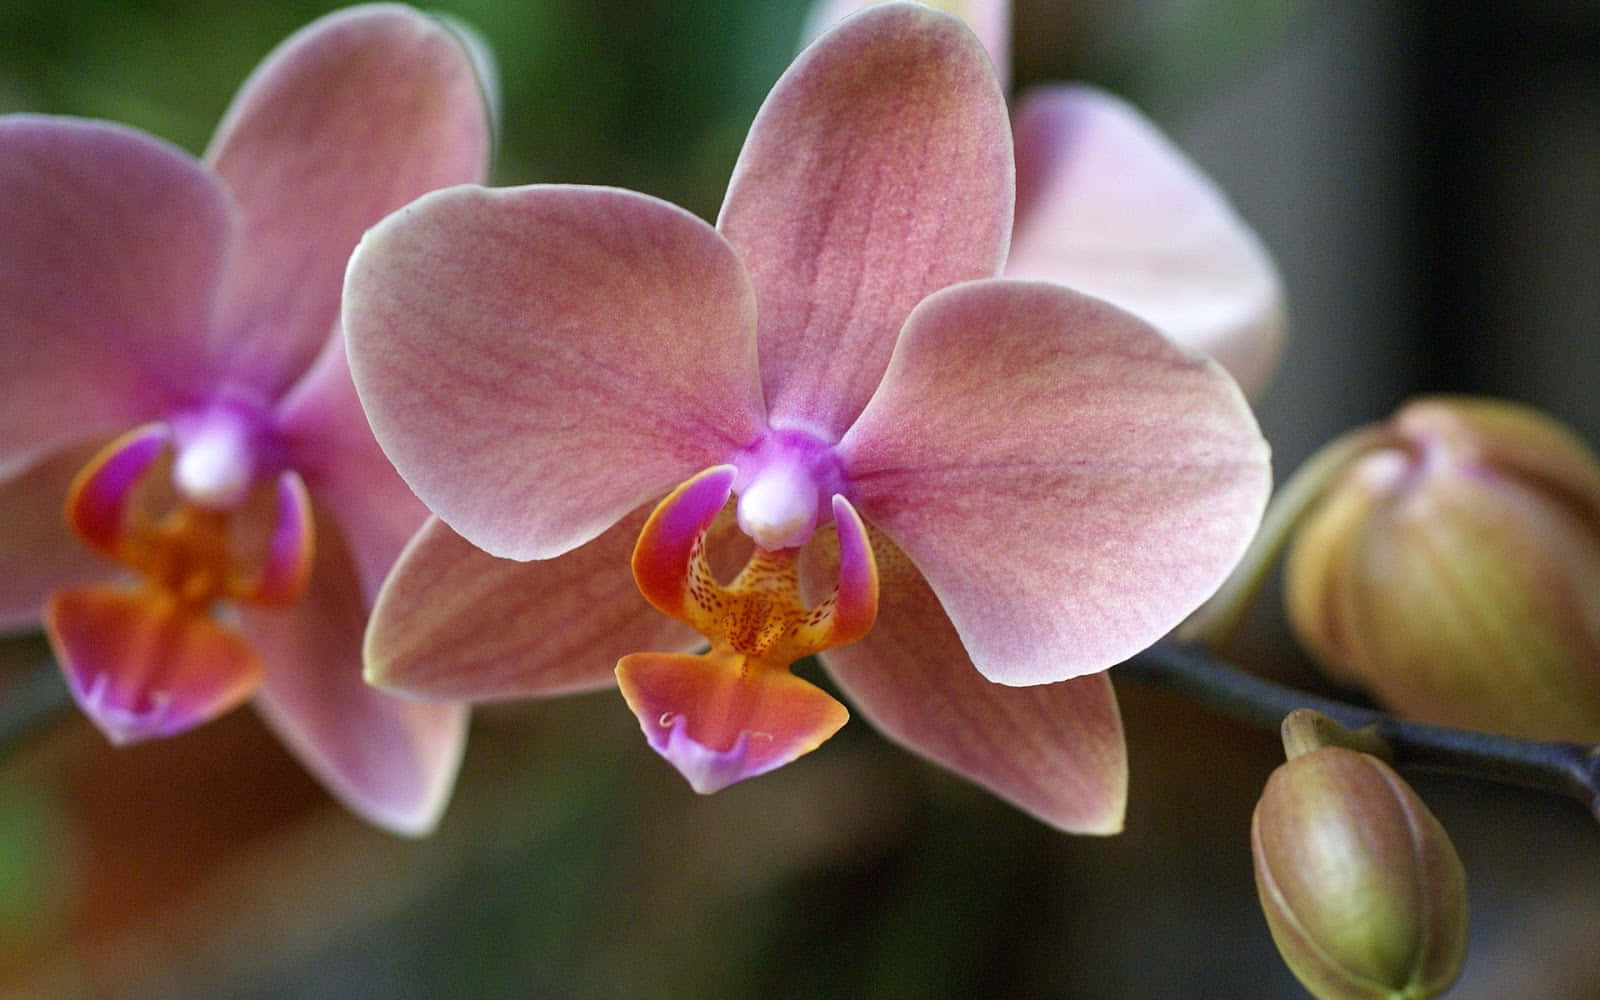 A stunning, vibrant Orchid flower with beautiful purple petals.